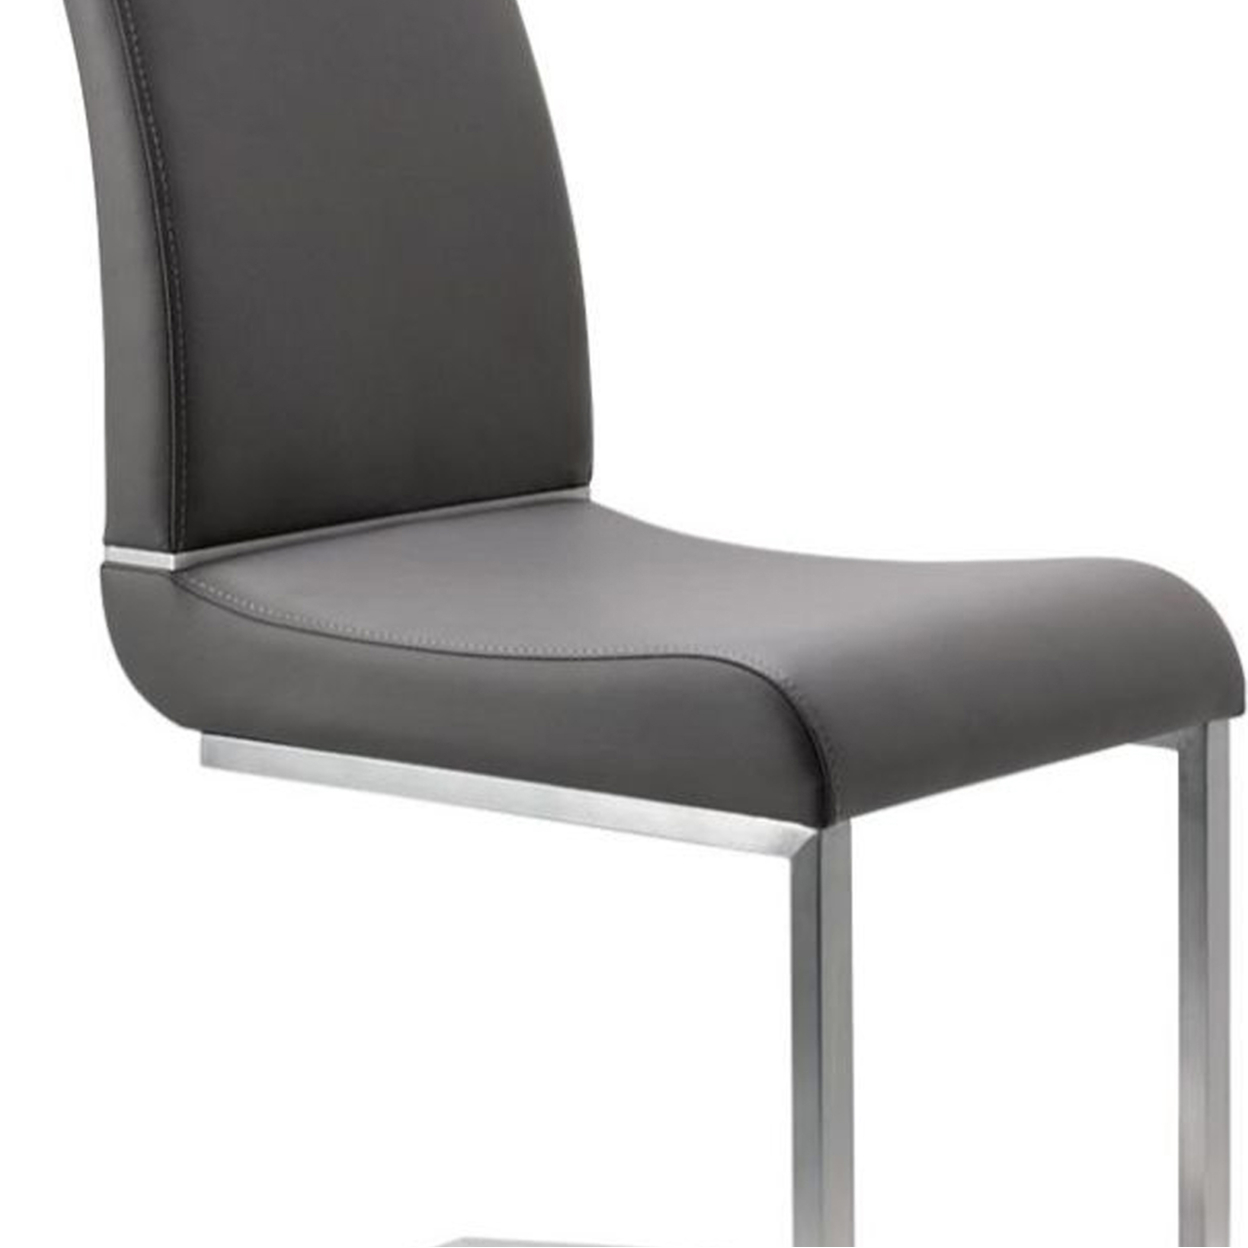 Stainless Steel Chair With Faux Leather Upholstery, Set Of Two, Gray And Silver- Saltoro Sherpi